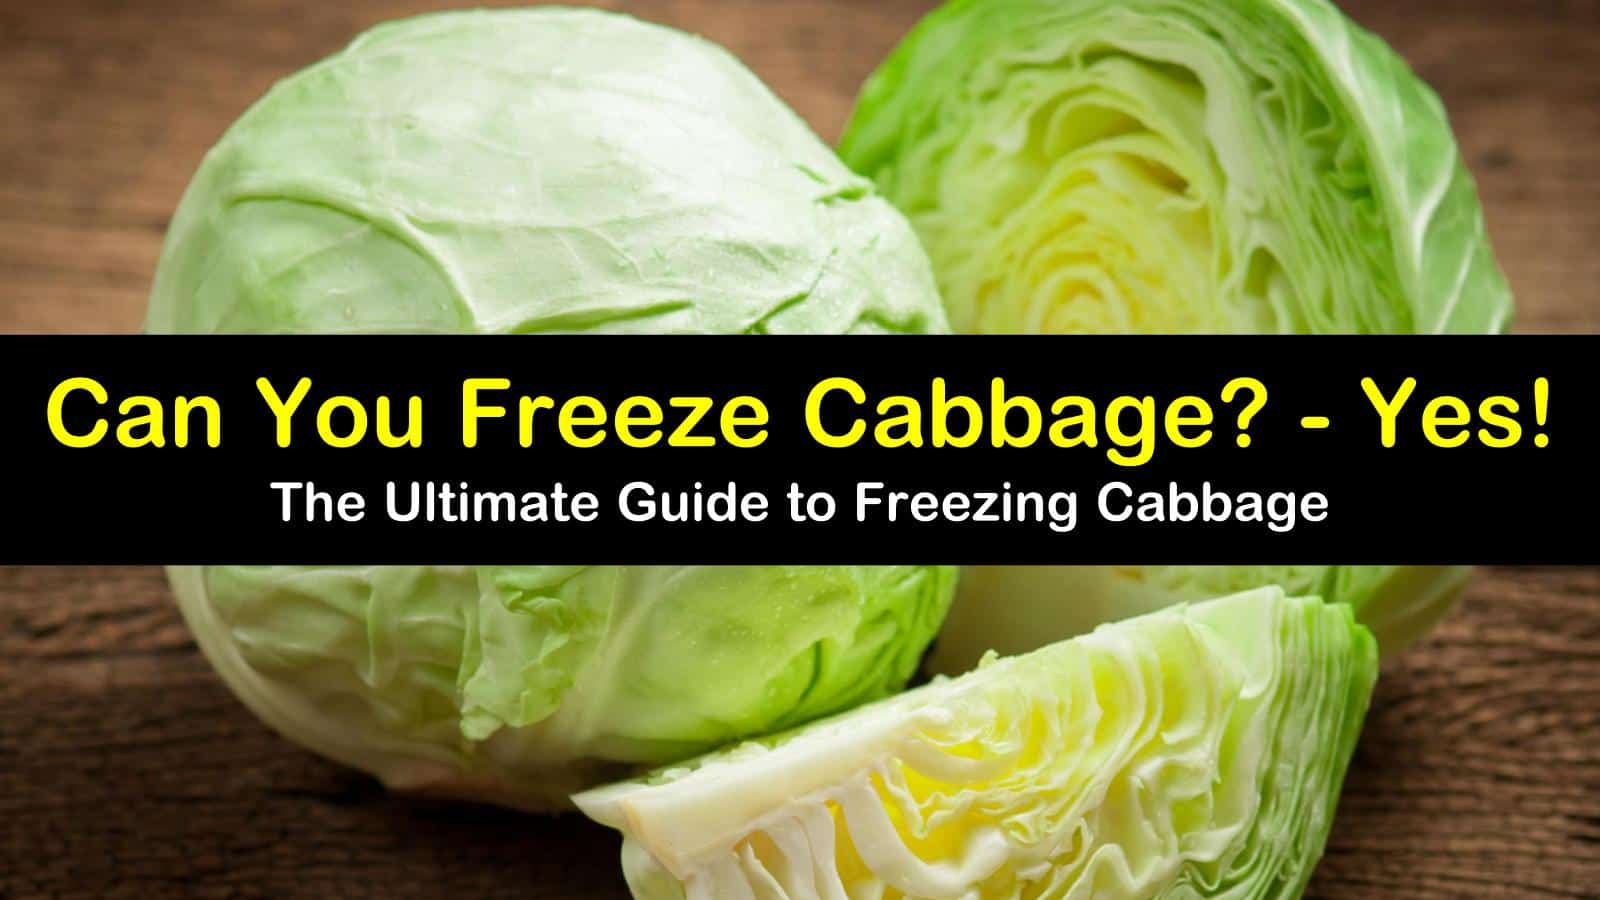 https://www.tipsbulletin.com/wp-content/uploads/2019/09/can-you-freeze-cabbage-t1.jpg